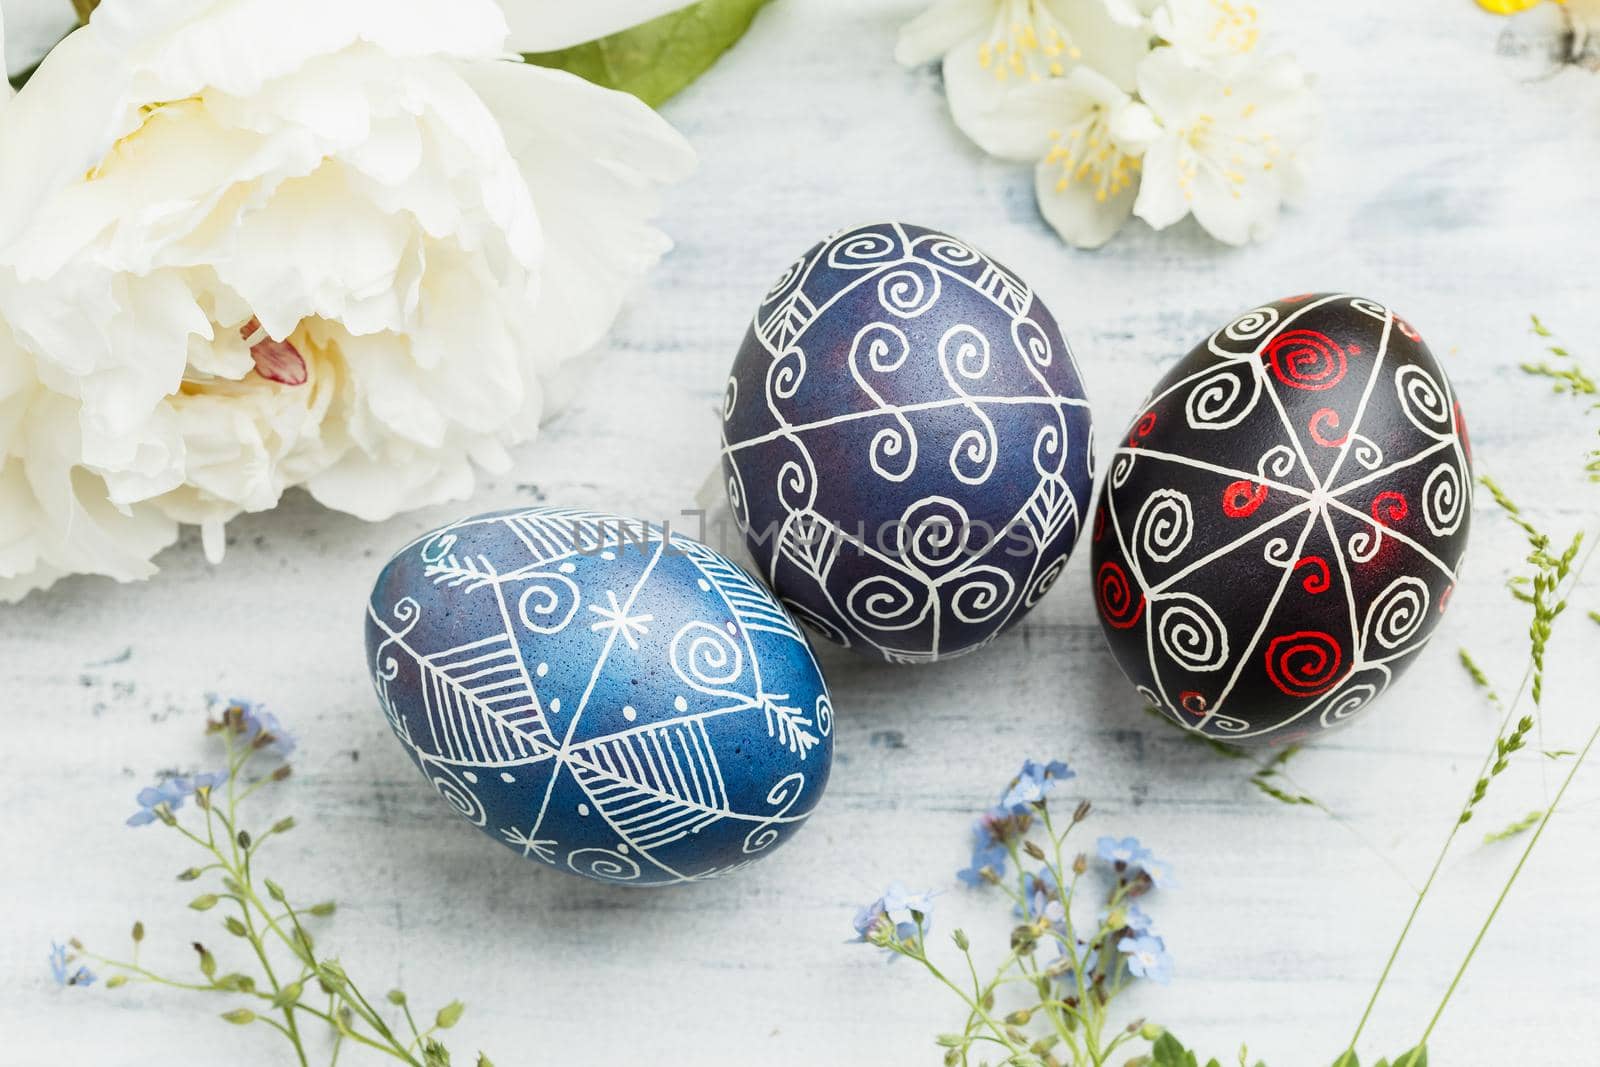 Three pysanky handmade Easter eggs. Ukrainian pysanky decorated with wax-resist dyeing technique. Holiday postcard